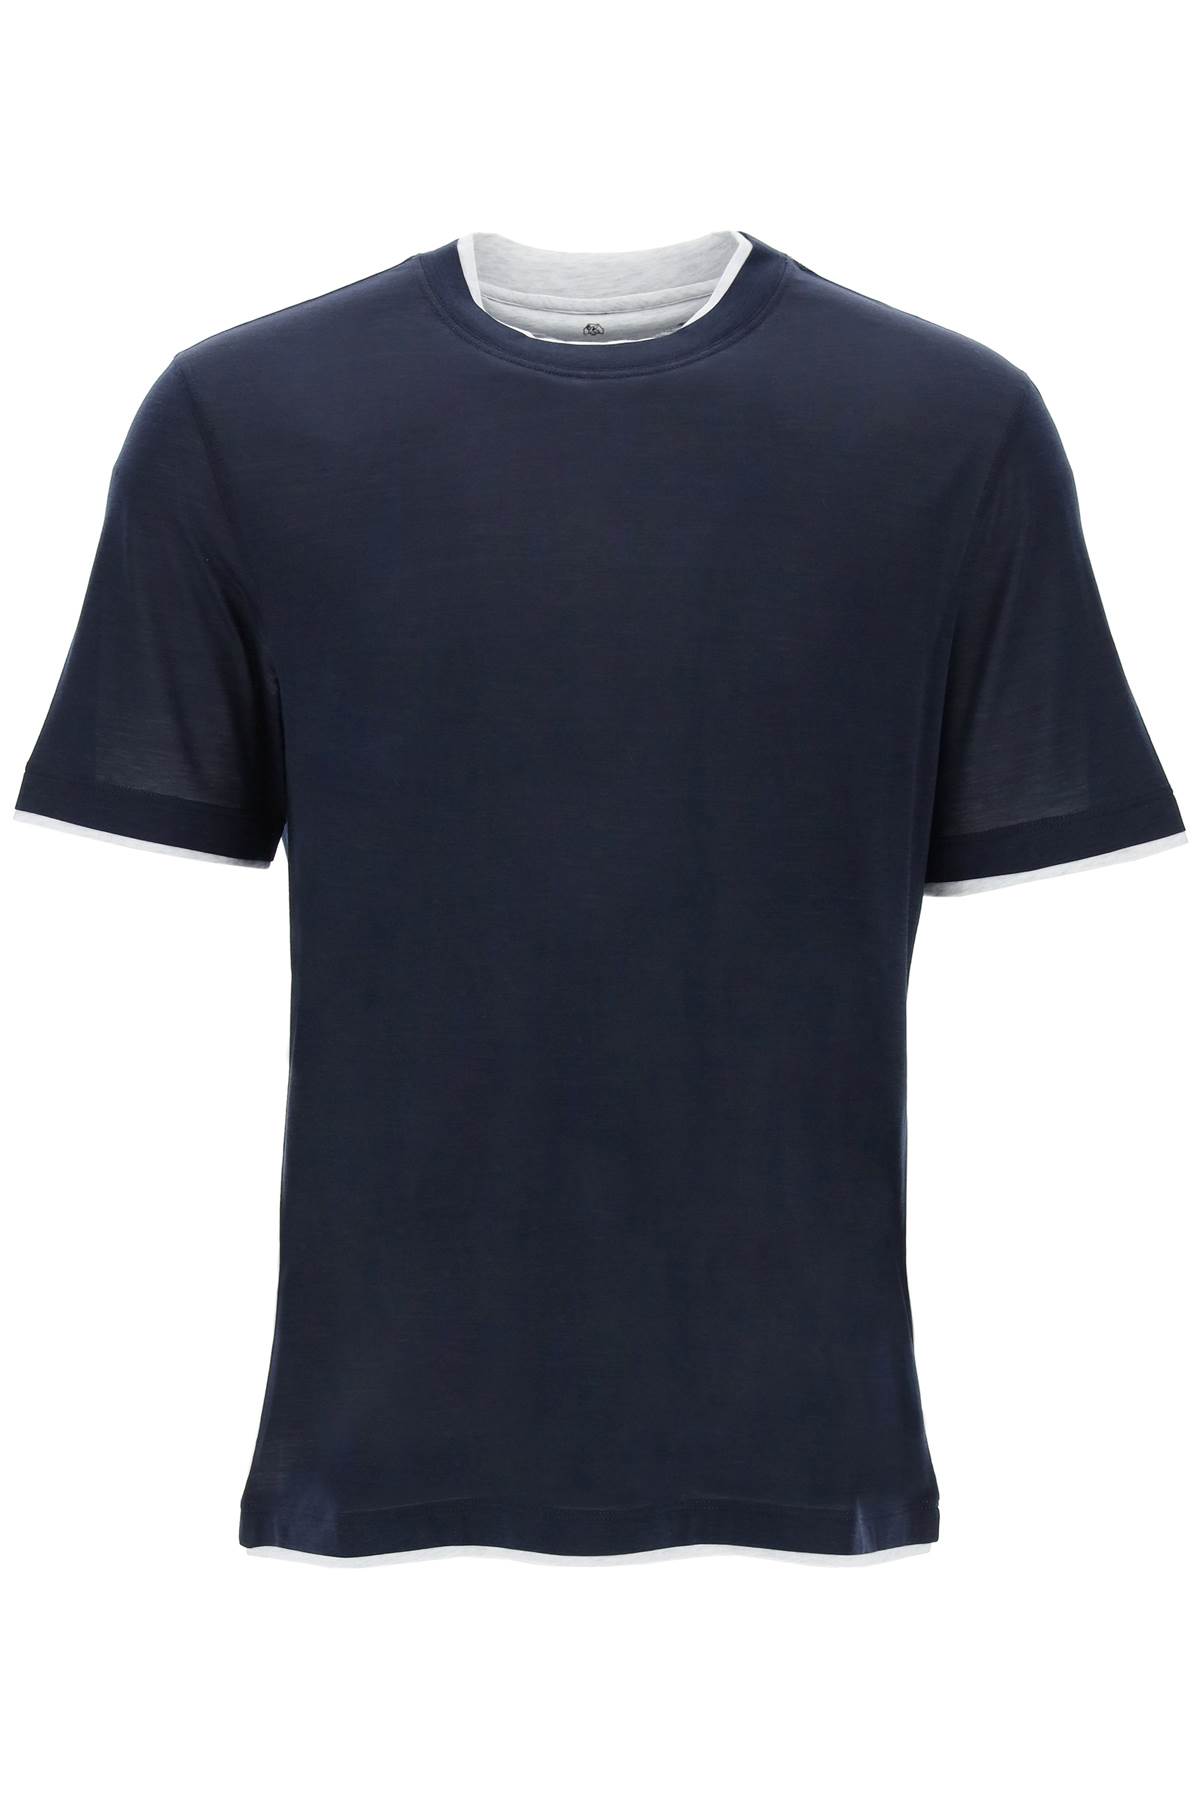 BRUNELLO CUCINELLI LAYERED-EFFECT T-SHIRT IN SILK AND COTTON